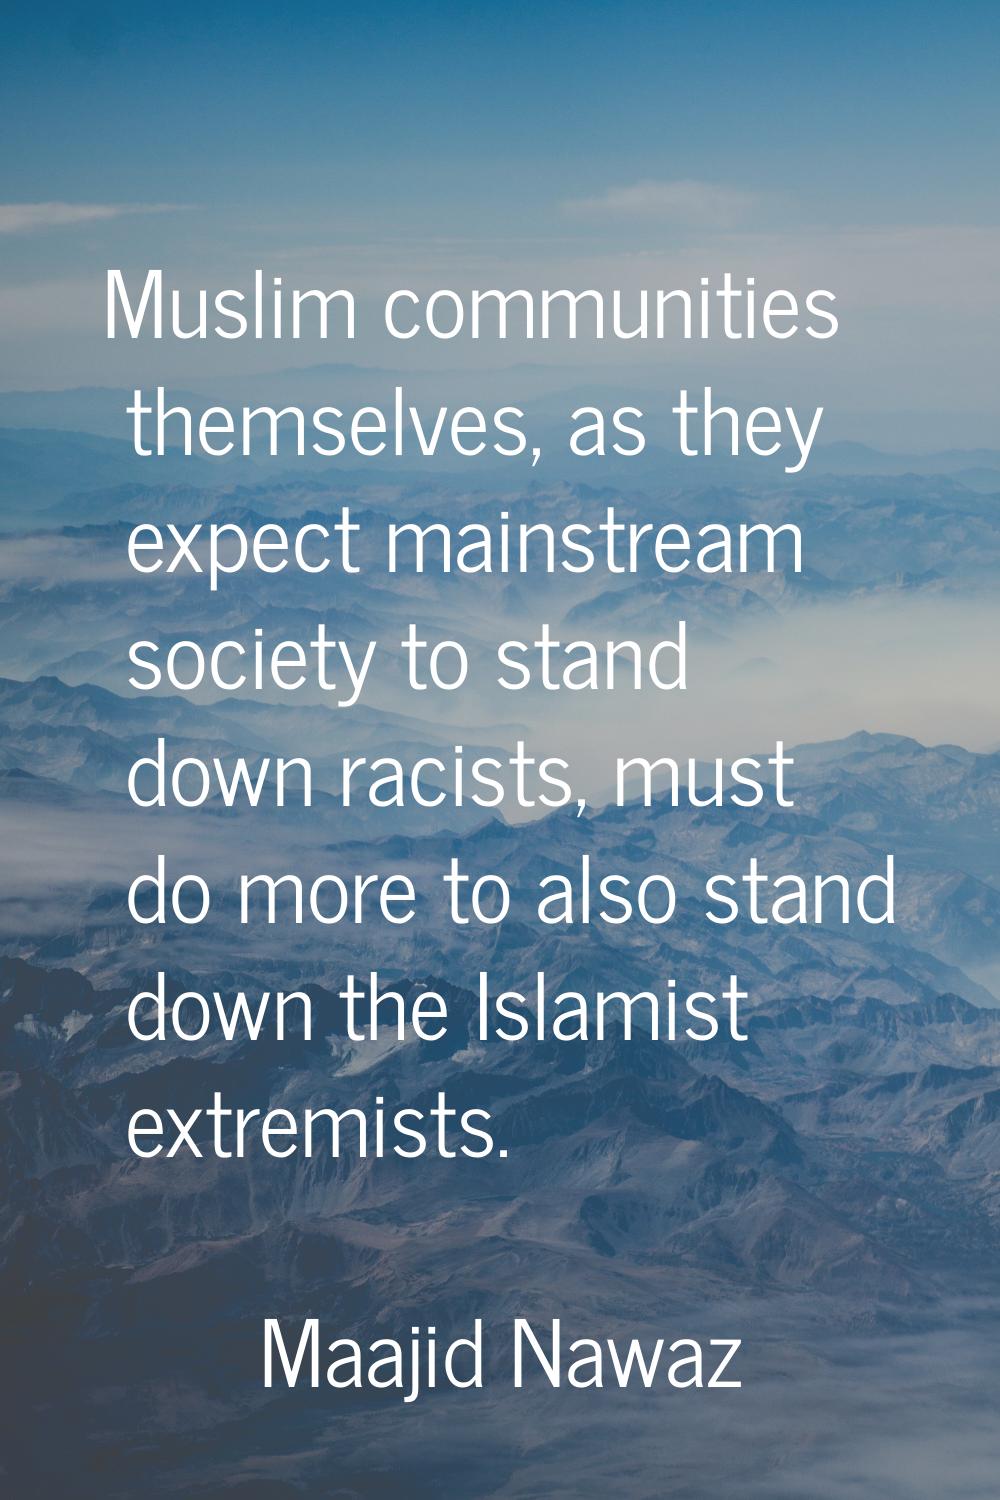 Muslim communities themselves, as they expect mainstream society to stand down racists, must do mor